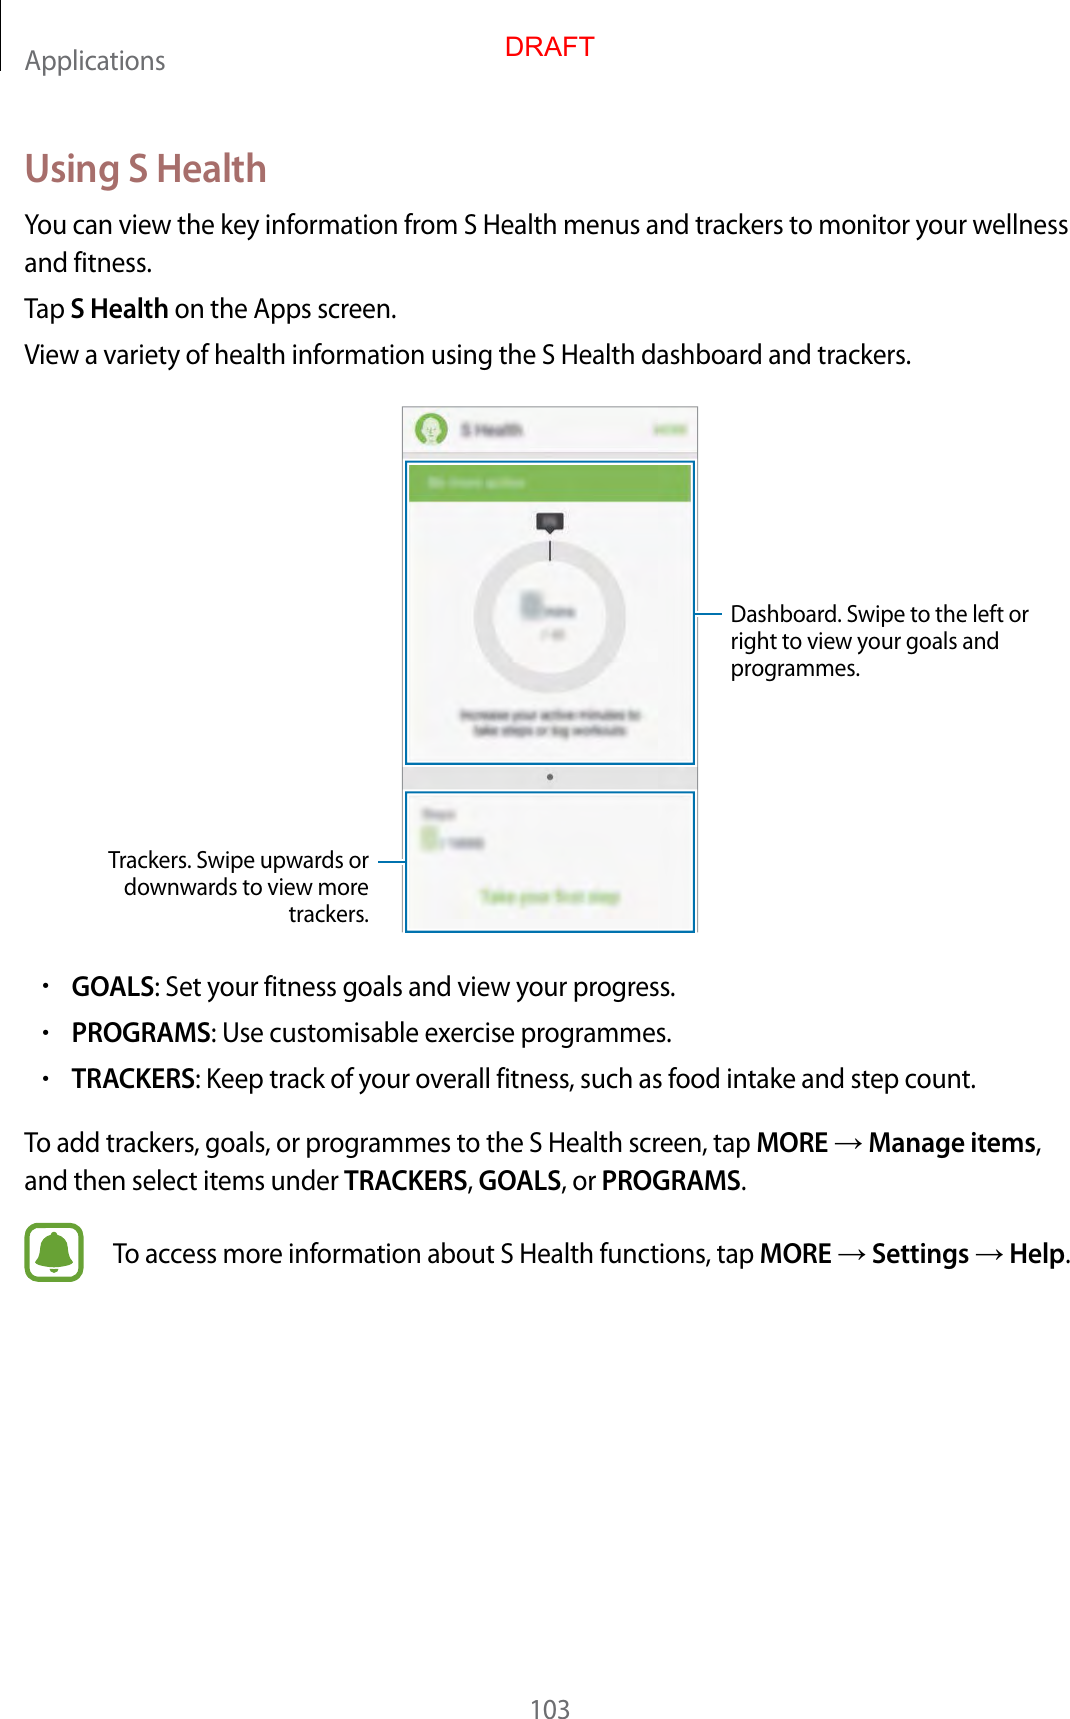 Applications103Using S HealthYou can view the key information from S Health menus and trackers to monitor your wellness and fitness.Tap S Health on the Apps screen.View a variety of health information using the S Health dashboard and trackers.Trackers. Swipe upwards or downwards to view more trackers.Dashboard. Swipe to the left or right to view your goals and programmes.•GOALS: Set your fitness goals and view your progress.•PROGRAMS: Use customisable exercise programmes.•TRACKERS: Keep track of your overall fitness, such as food intake and step count.To add trackers, goals, or programmes to the S Health screen, tap MORE  Manage items, and then select items under TRACKERS, GOALS, or PROGRAMS.To access more information about S Health functions, tap MORE  Settings  Help.DRAFT